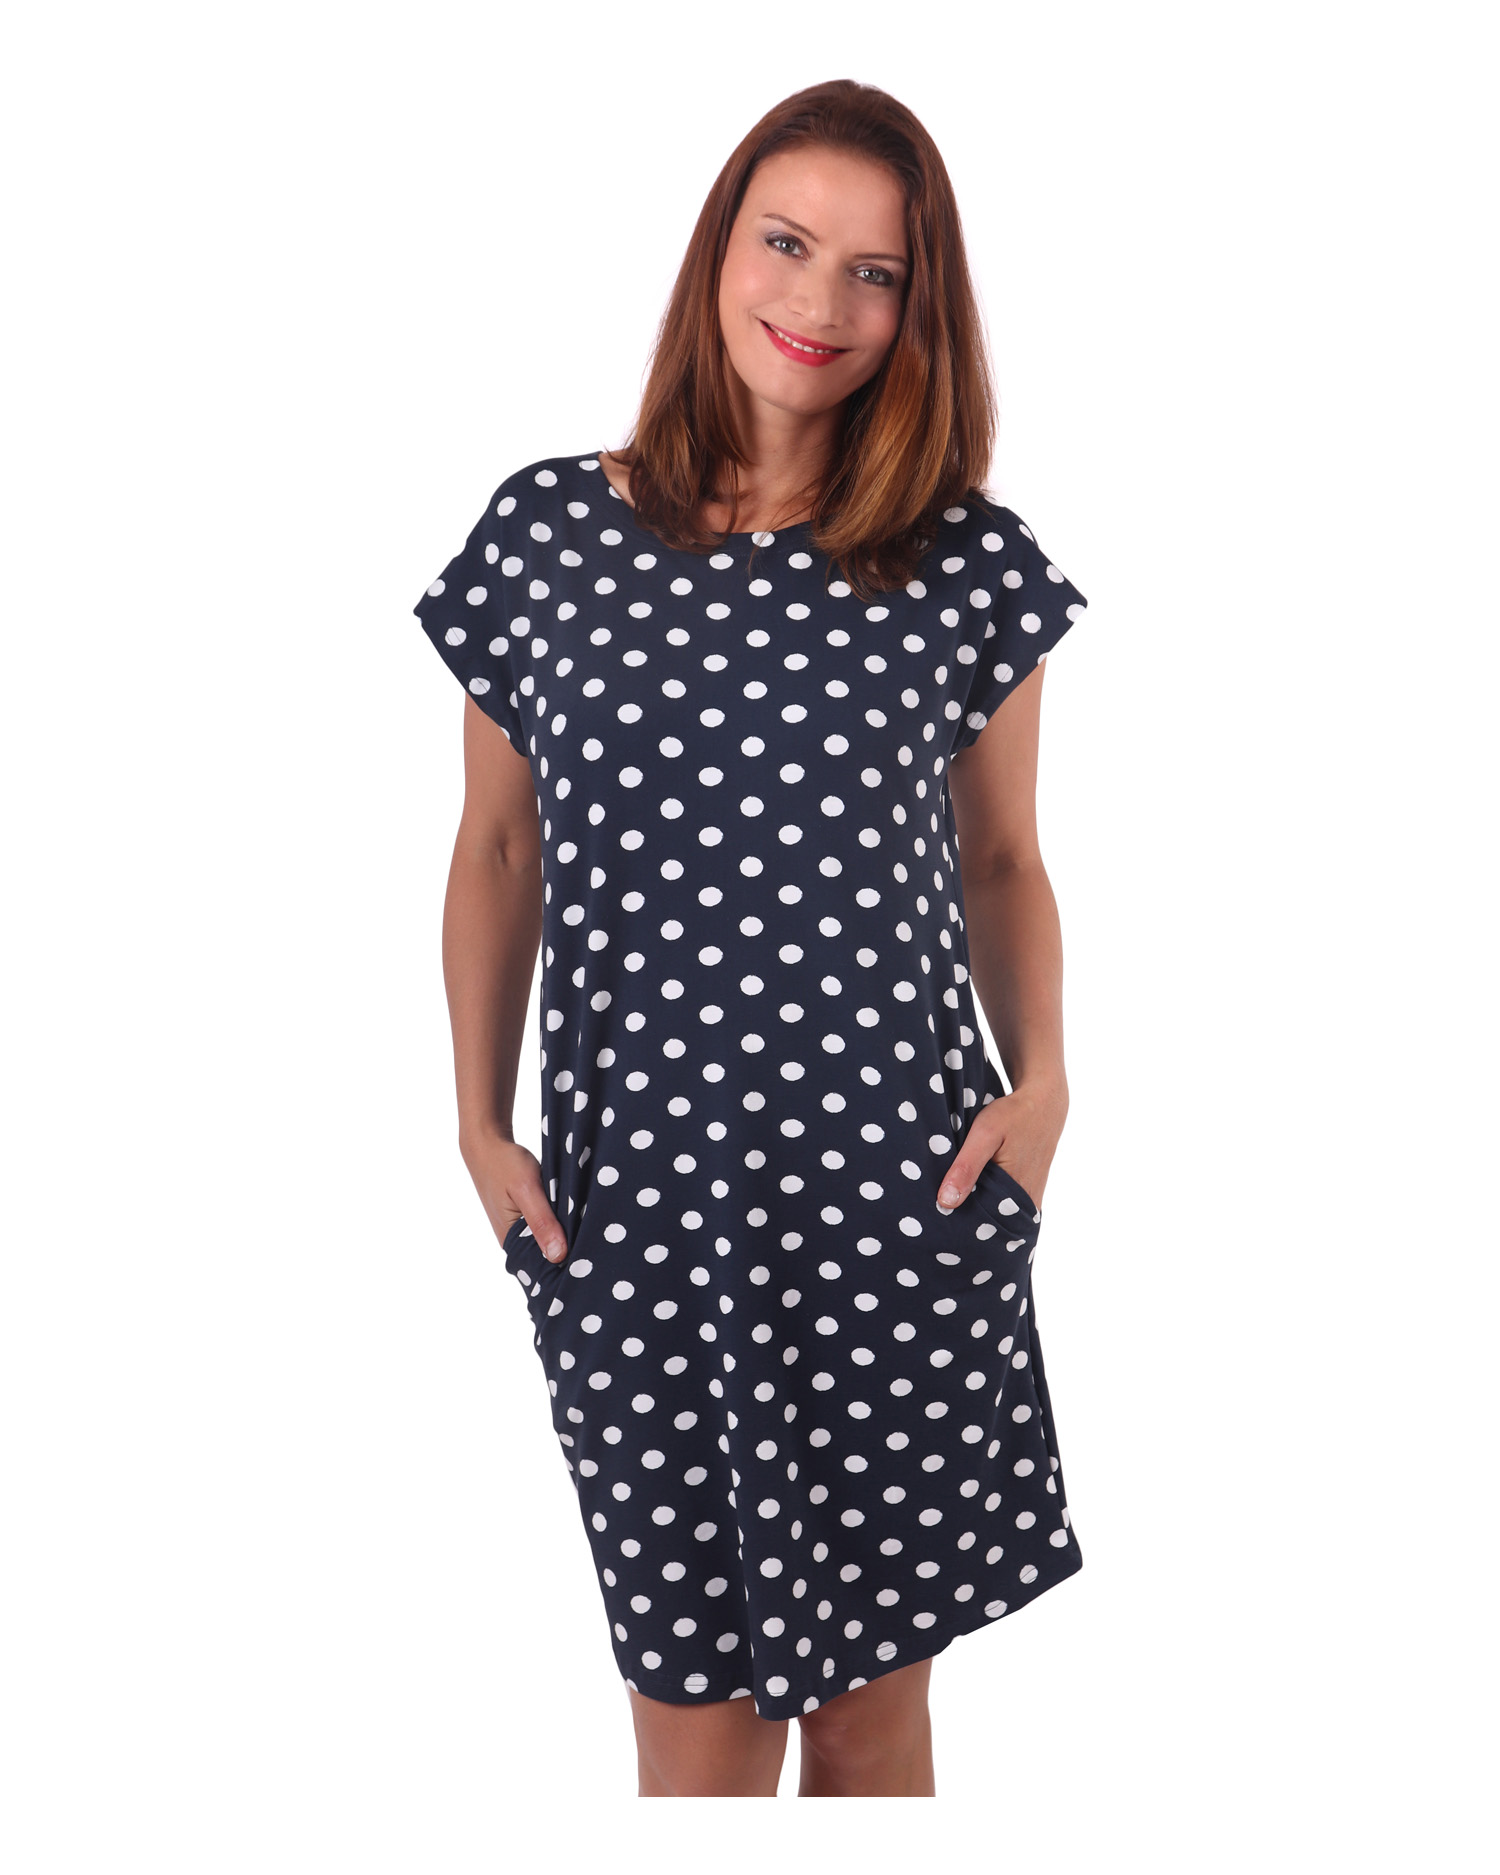 Women's dress with pockets Zoe, oversized loose fit, blue with polka dots